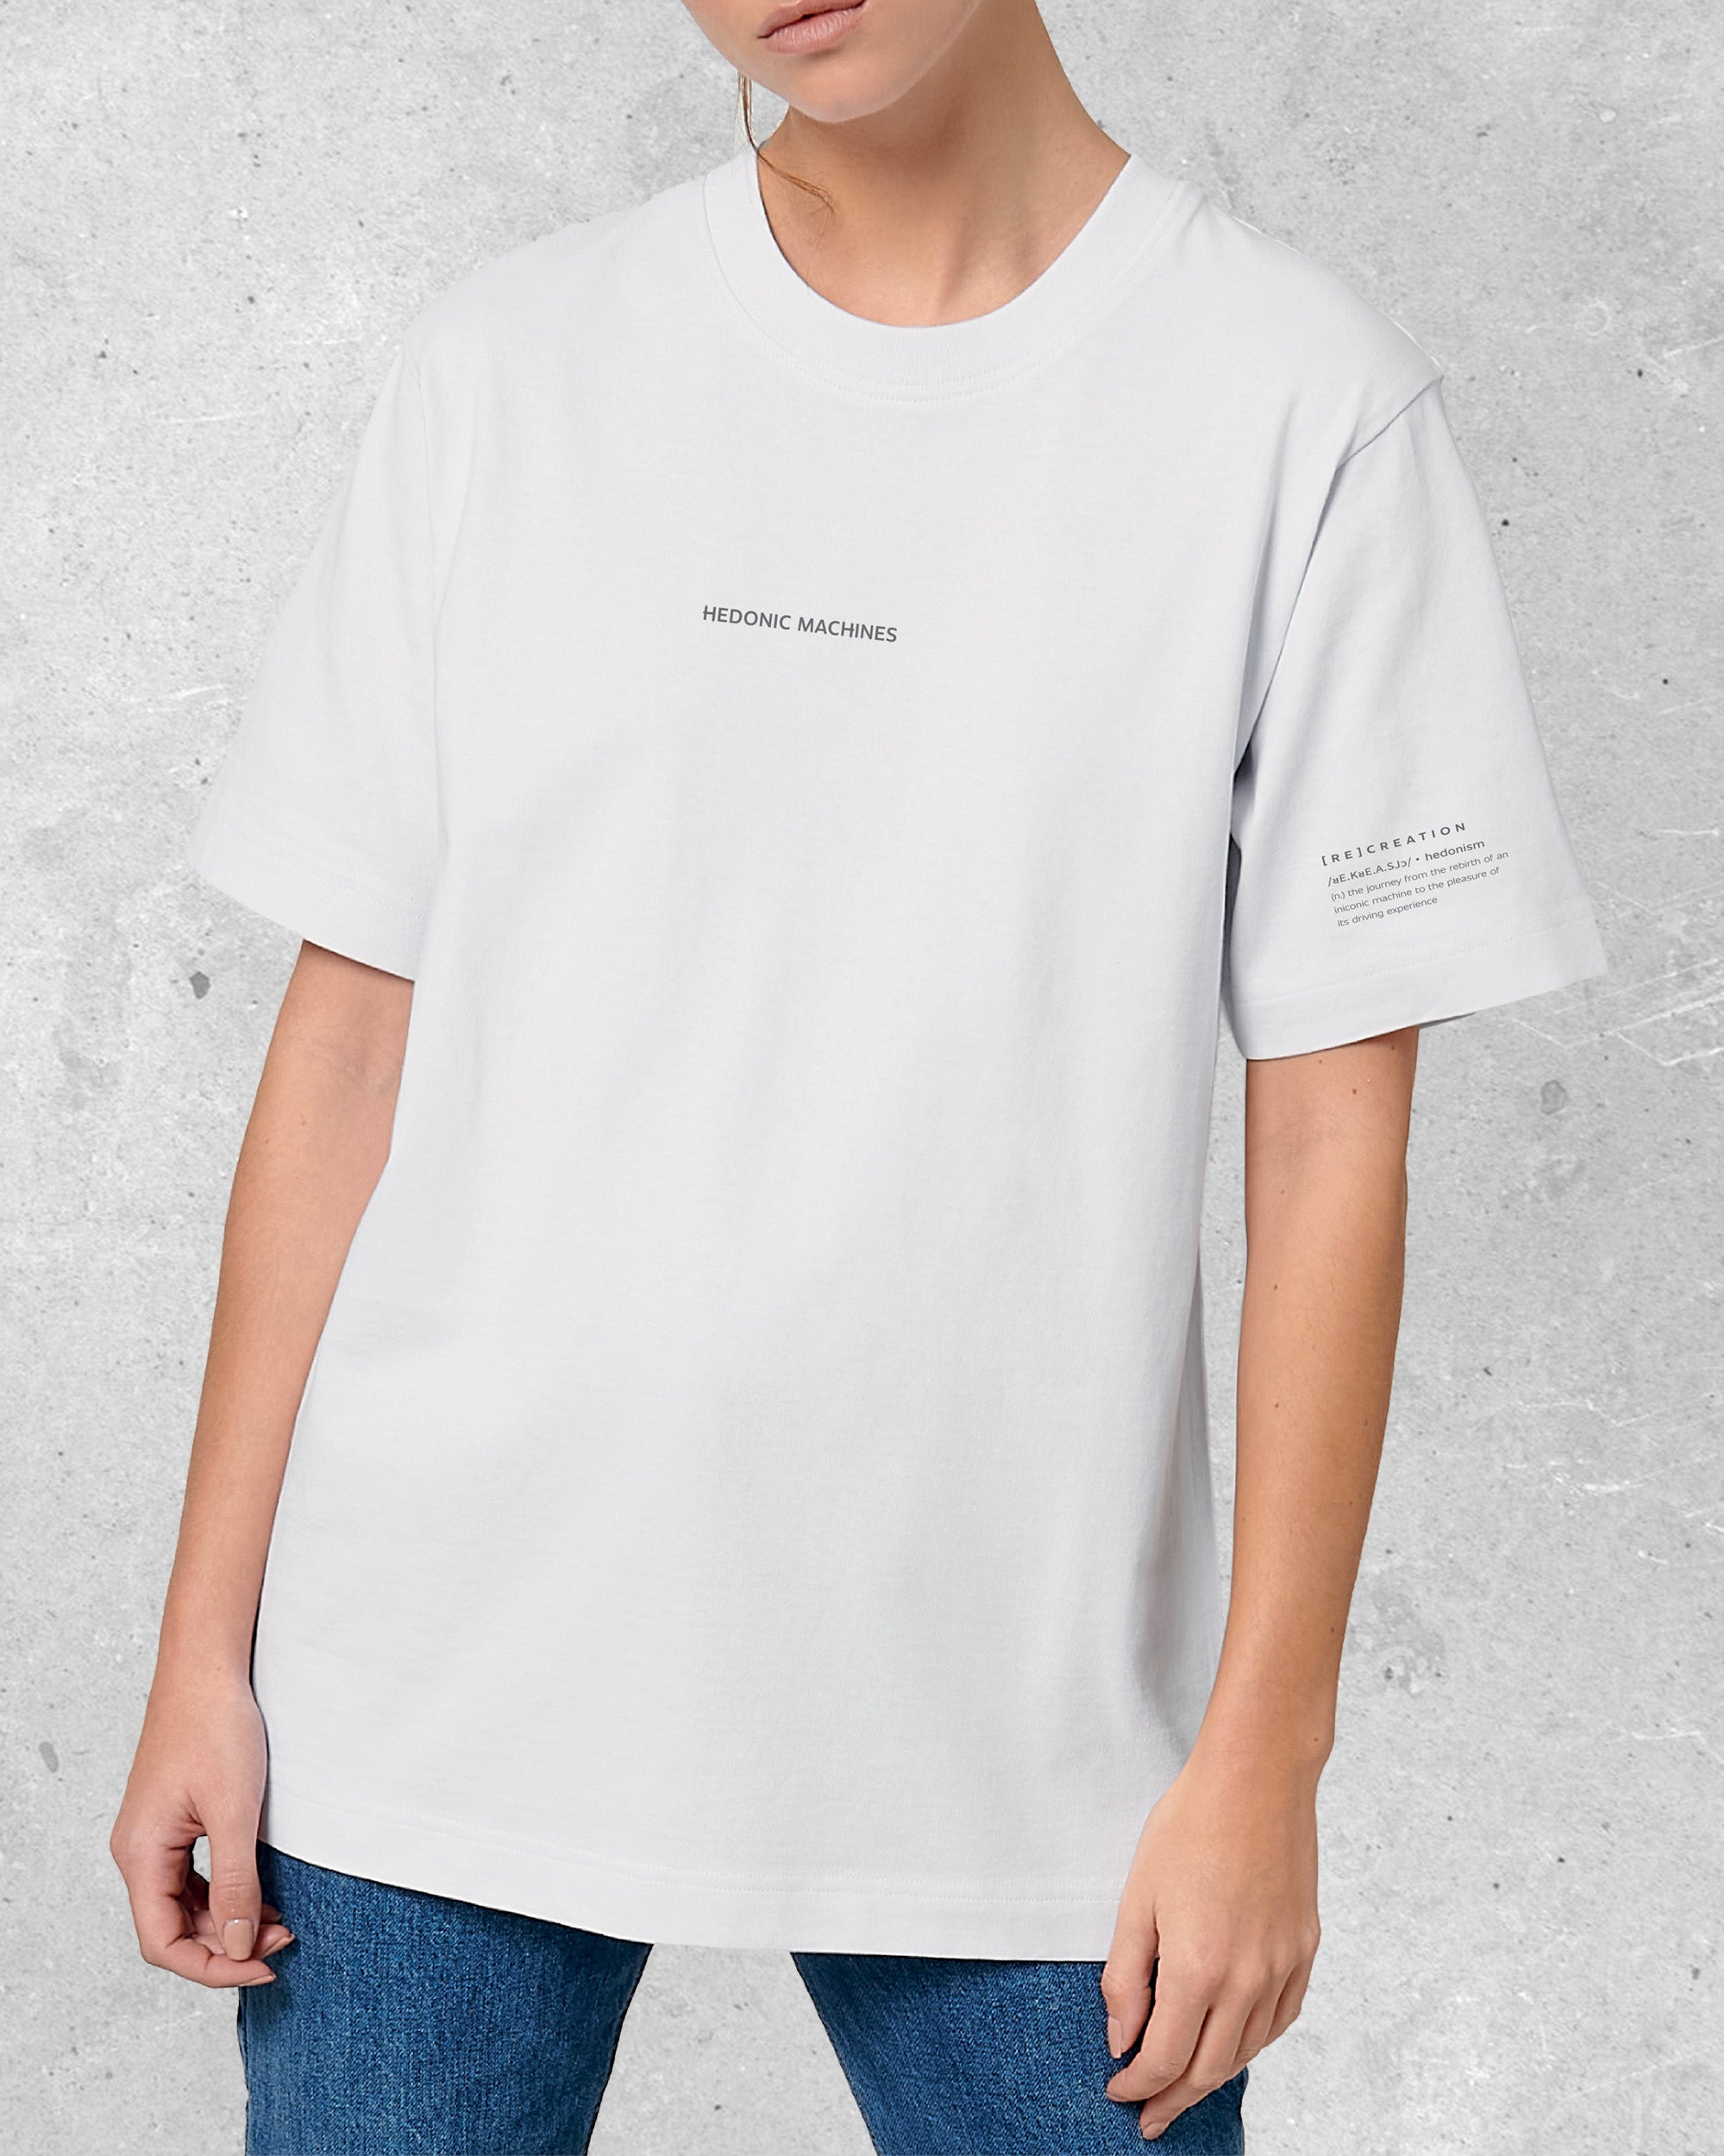 White T-Shirt - [H]000 Ghost View